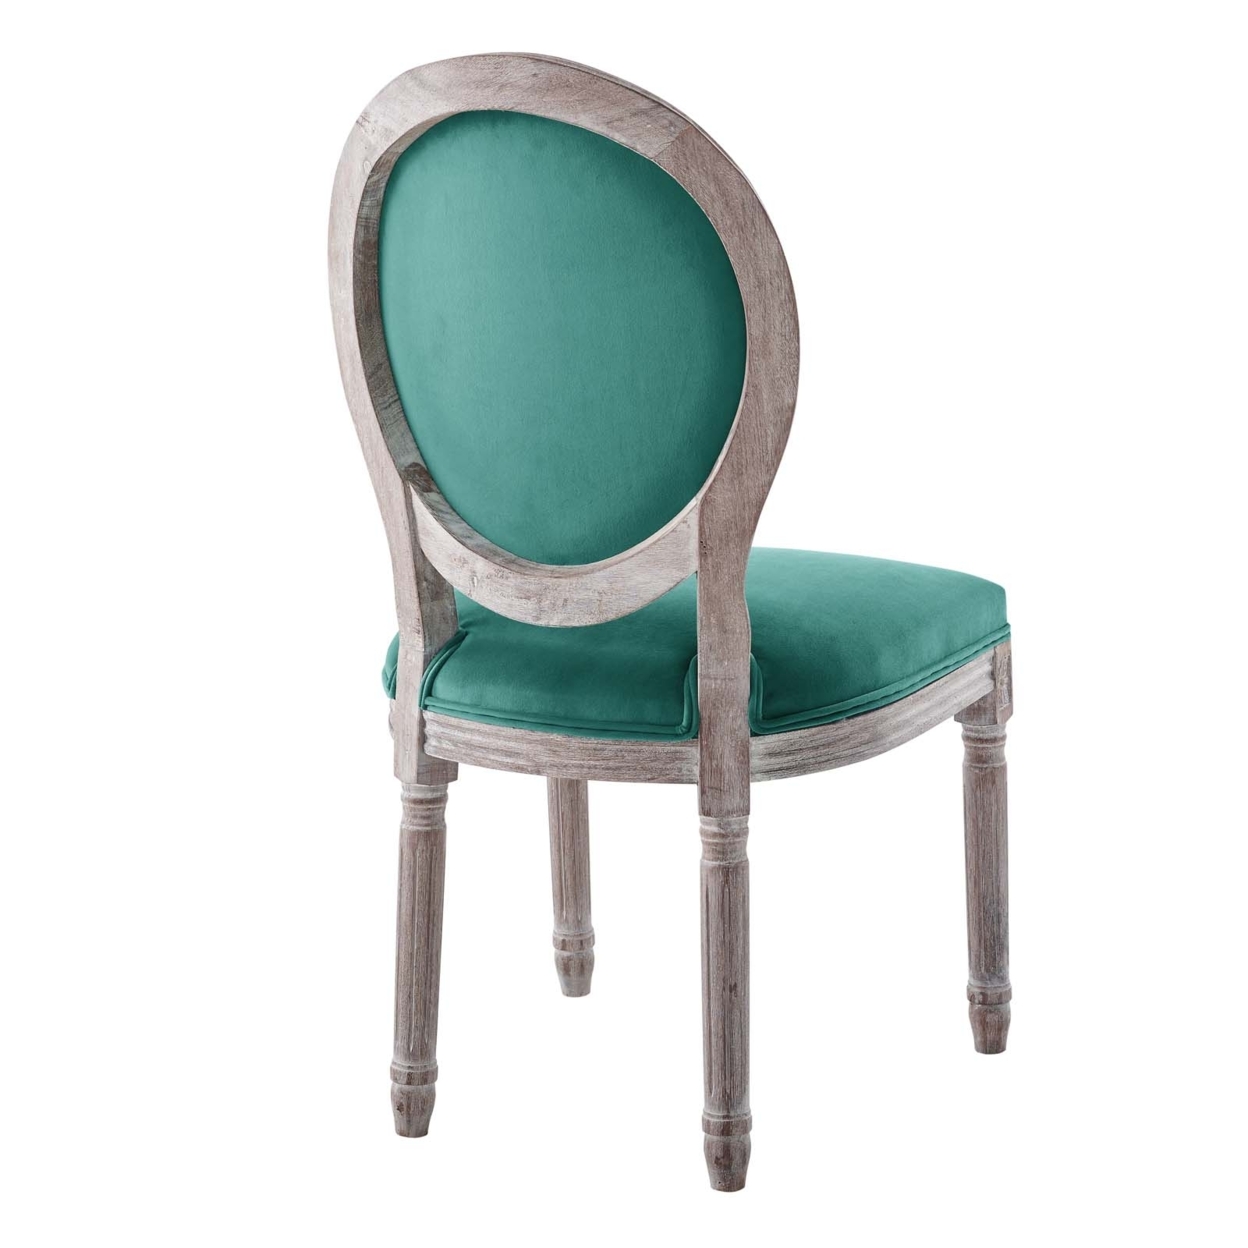 Arise Vintage French Performance Velvet Dining Side Chair, Natural Teal